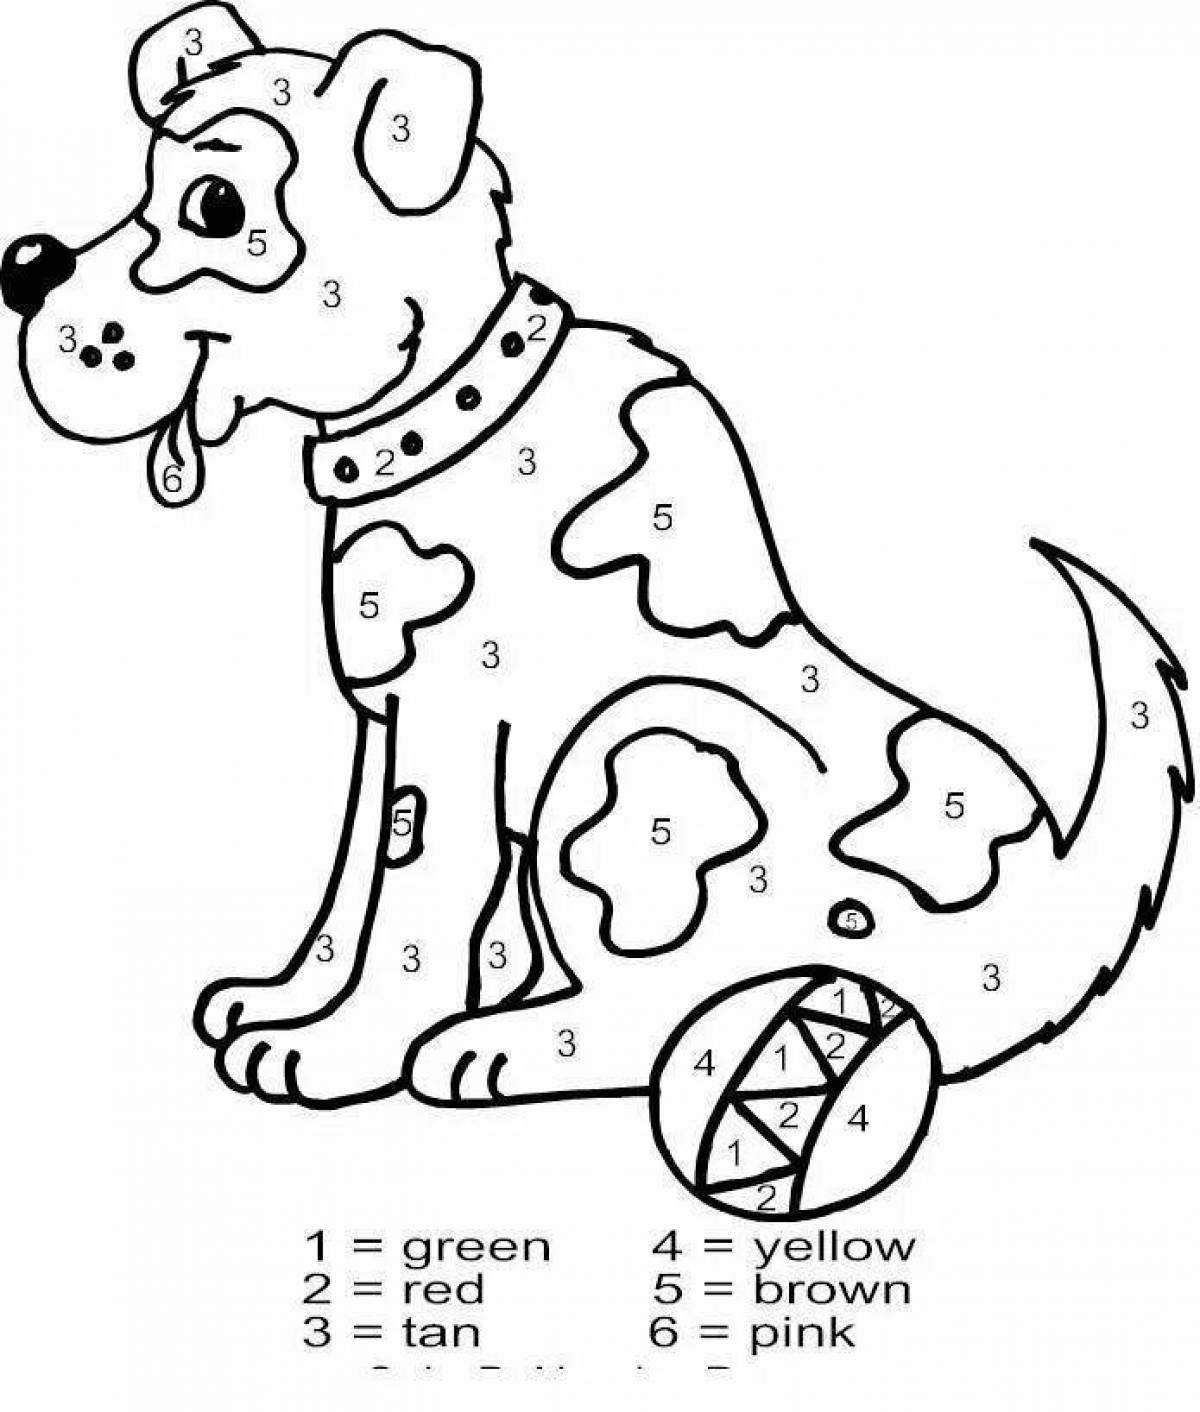 Bright dog coloring by numbers